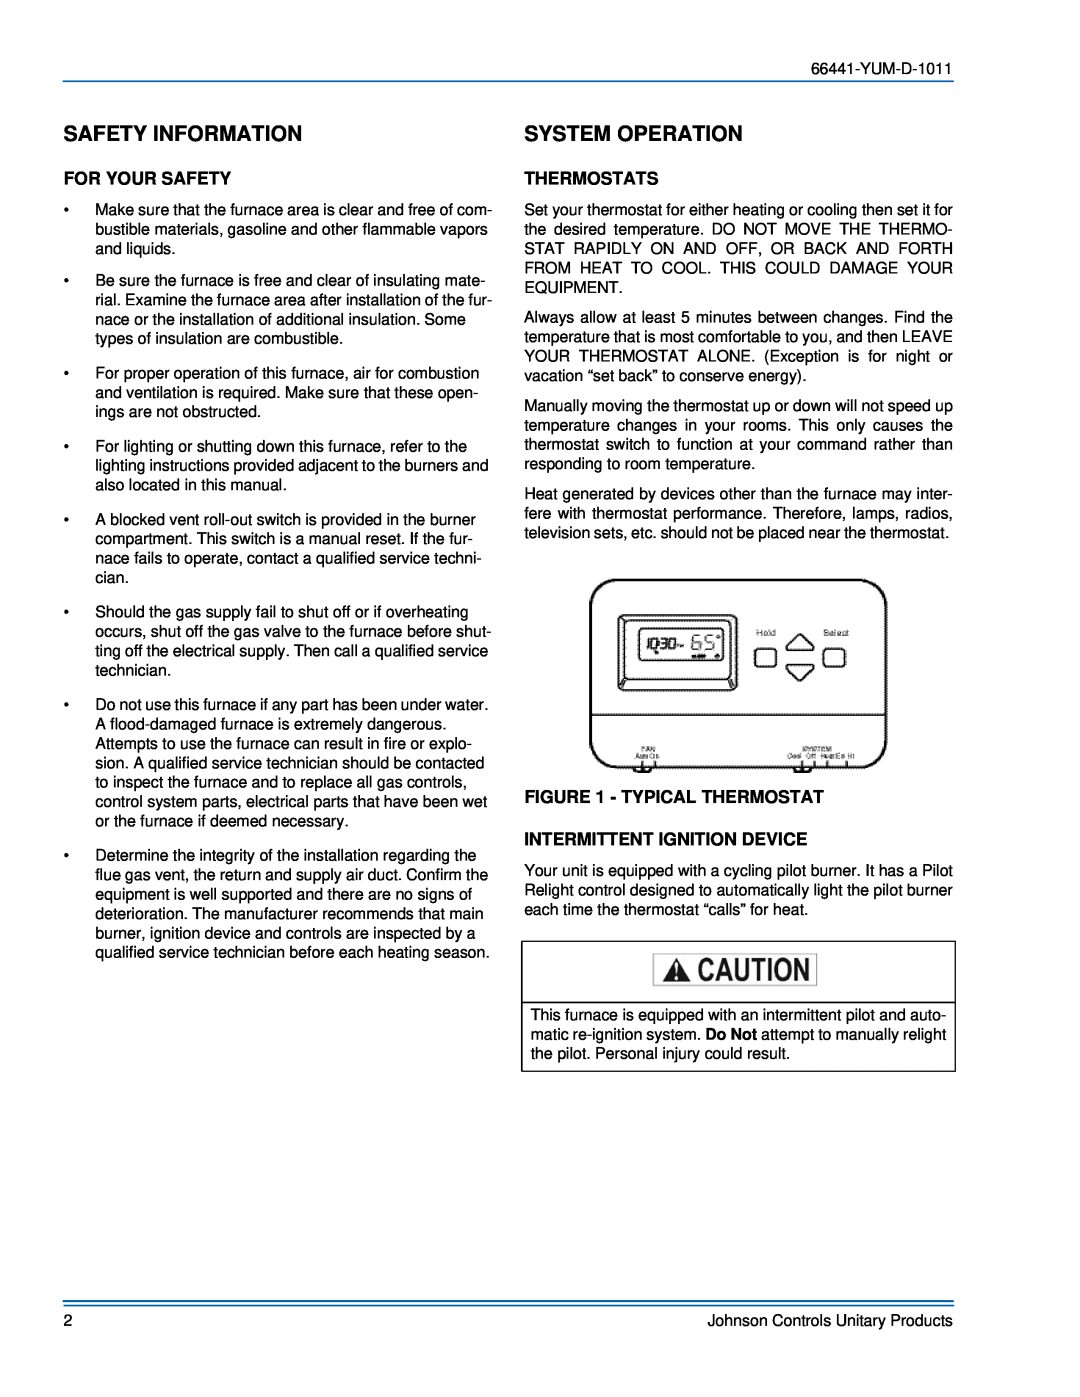 York 66441-YUM-D-1011 manual Safety Information, System Operation, For Your Safety, Thermostats, Typical Thermostat 